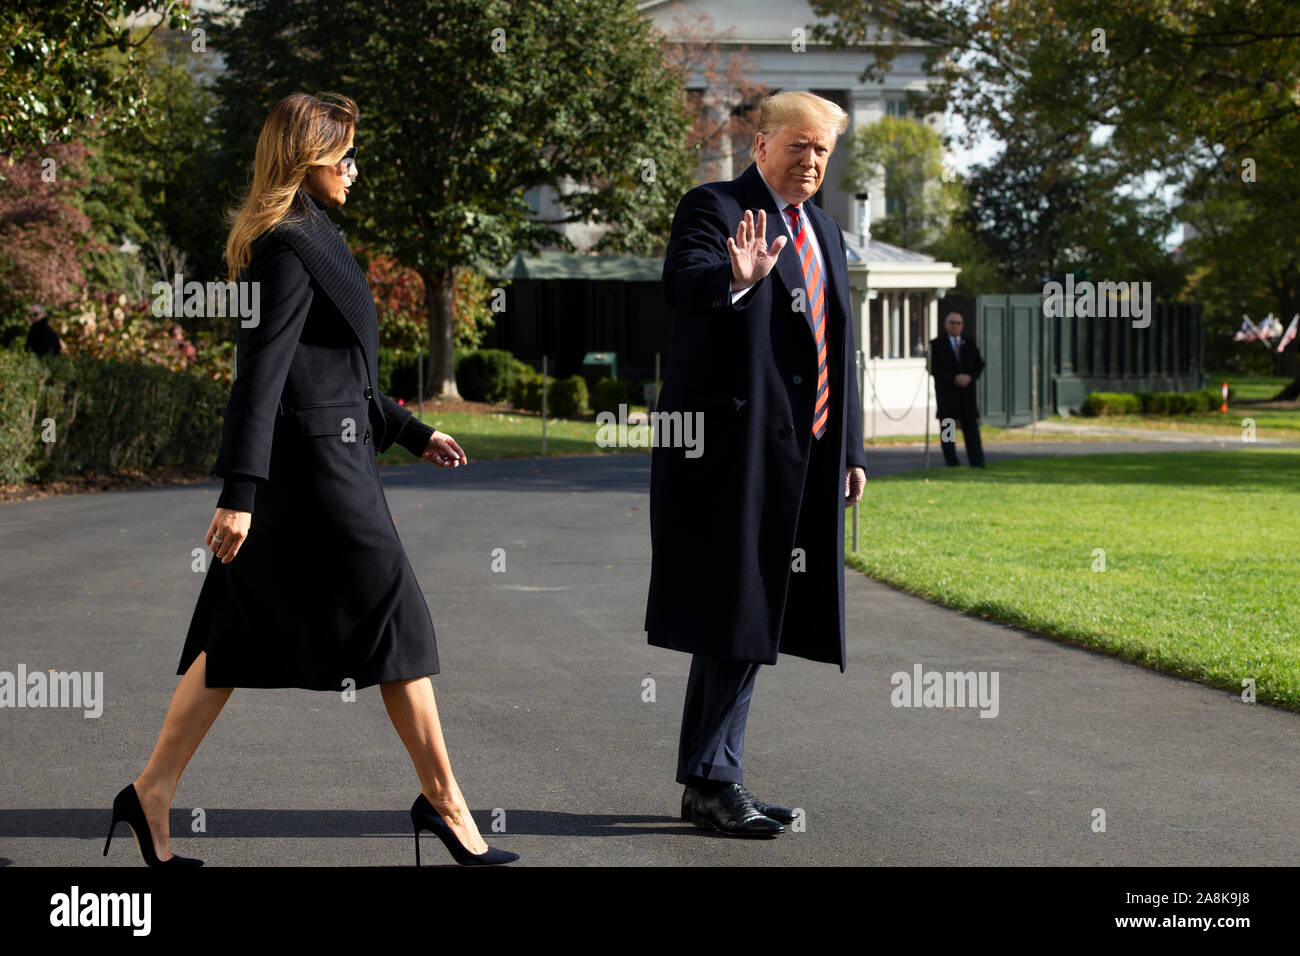 Washington DC, USA. 09th Nov, 2019. US President Donald J. Trump (R) waves beside First Lady Melania Trump (L) as they walk aross the South Lawn of the White House to depart by Marine One in Washington, DC, USA, 09 November 2019. The President and First Lady will attend a National Collegiate Athletic Association (NCAA) football game between Alabama and Louisiana State University in Tuscaloosa, Alabama; then they will stay in New York City through Veterans Day. Credit: MediaPunch Inc/Alamy Live News Stock Photo